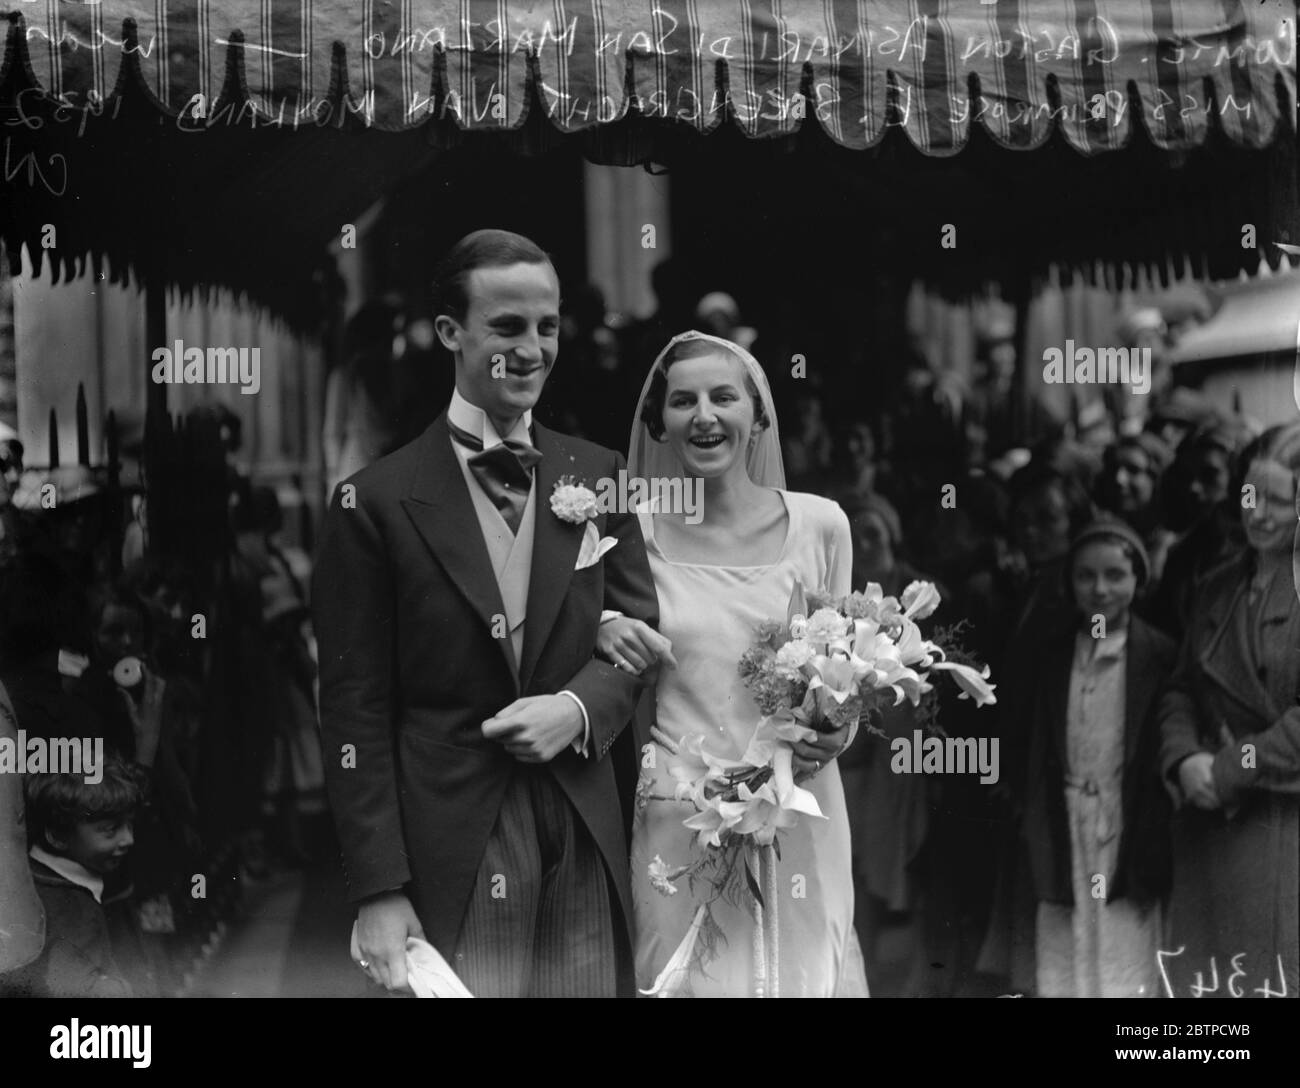 17 year old bride . The wedding at St James 's Church , London , between Conte Gaston Asinari di San Marzano who is aged 23 , and Miss Primrose Elizabeth Steengracht van Moyland . The bride and bridegroom leaving after the ceremony . 10 September 1932 Stock Photo